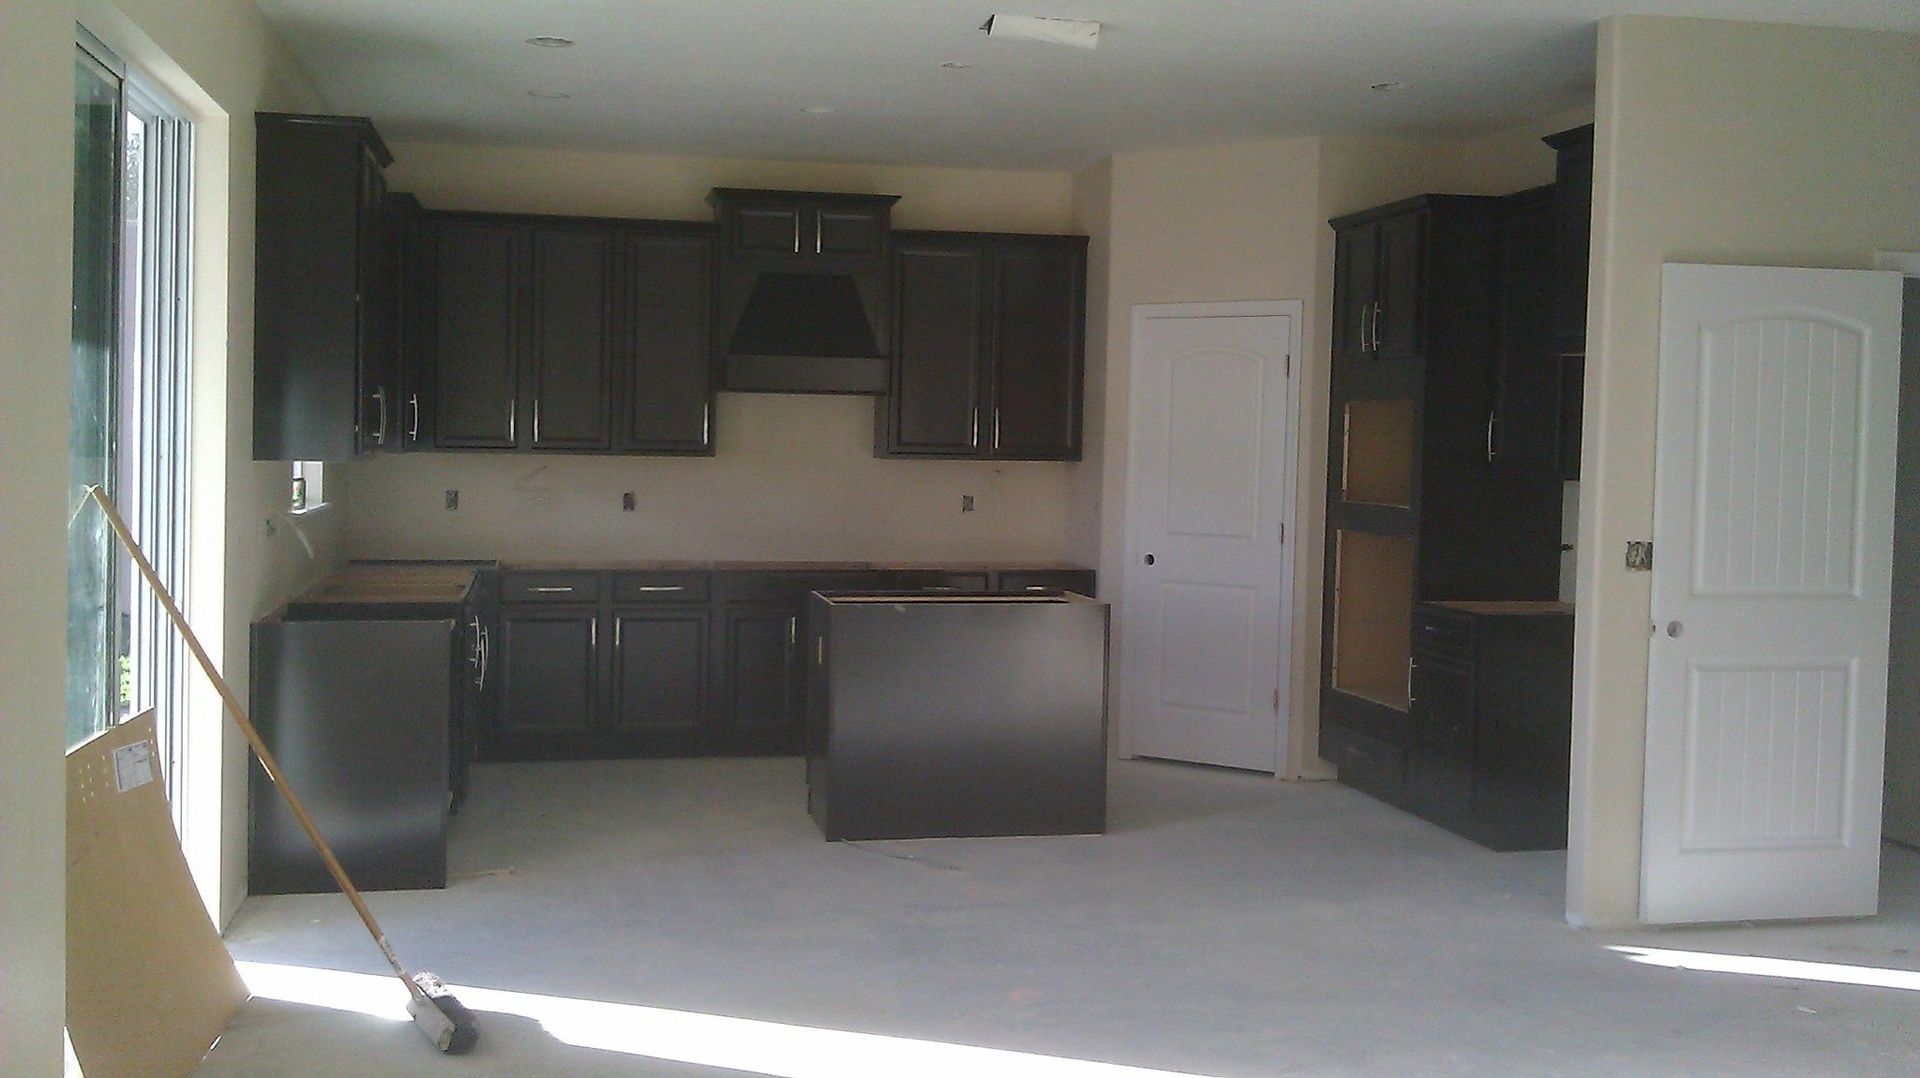 Hand Crafted Cabinets Custom Built To Order By M K Cabinets Inc